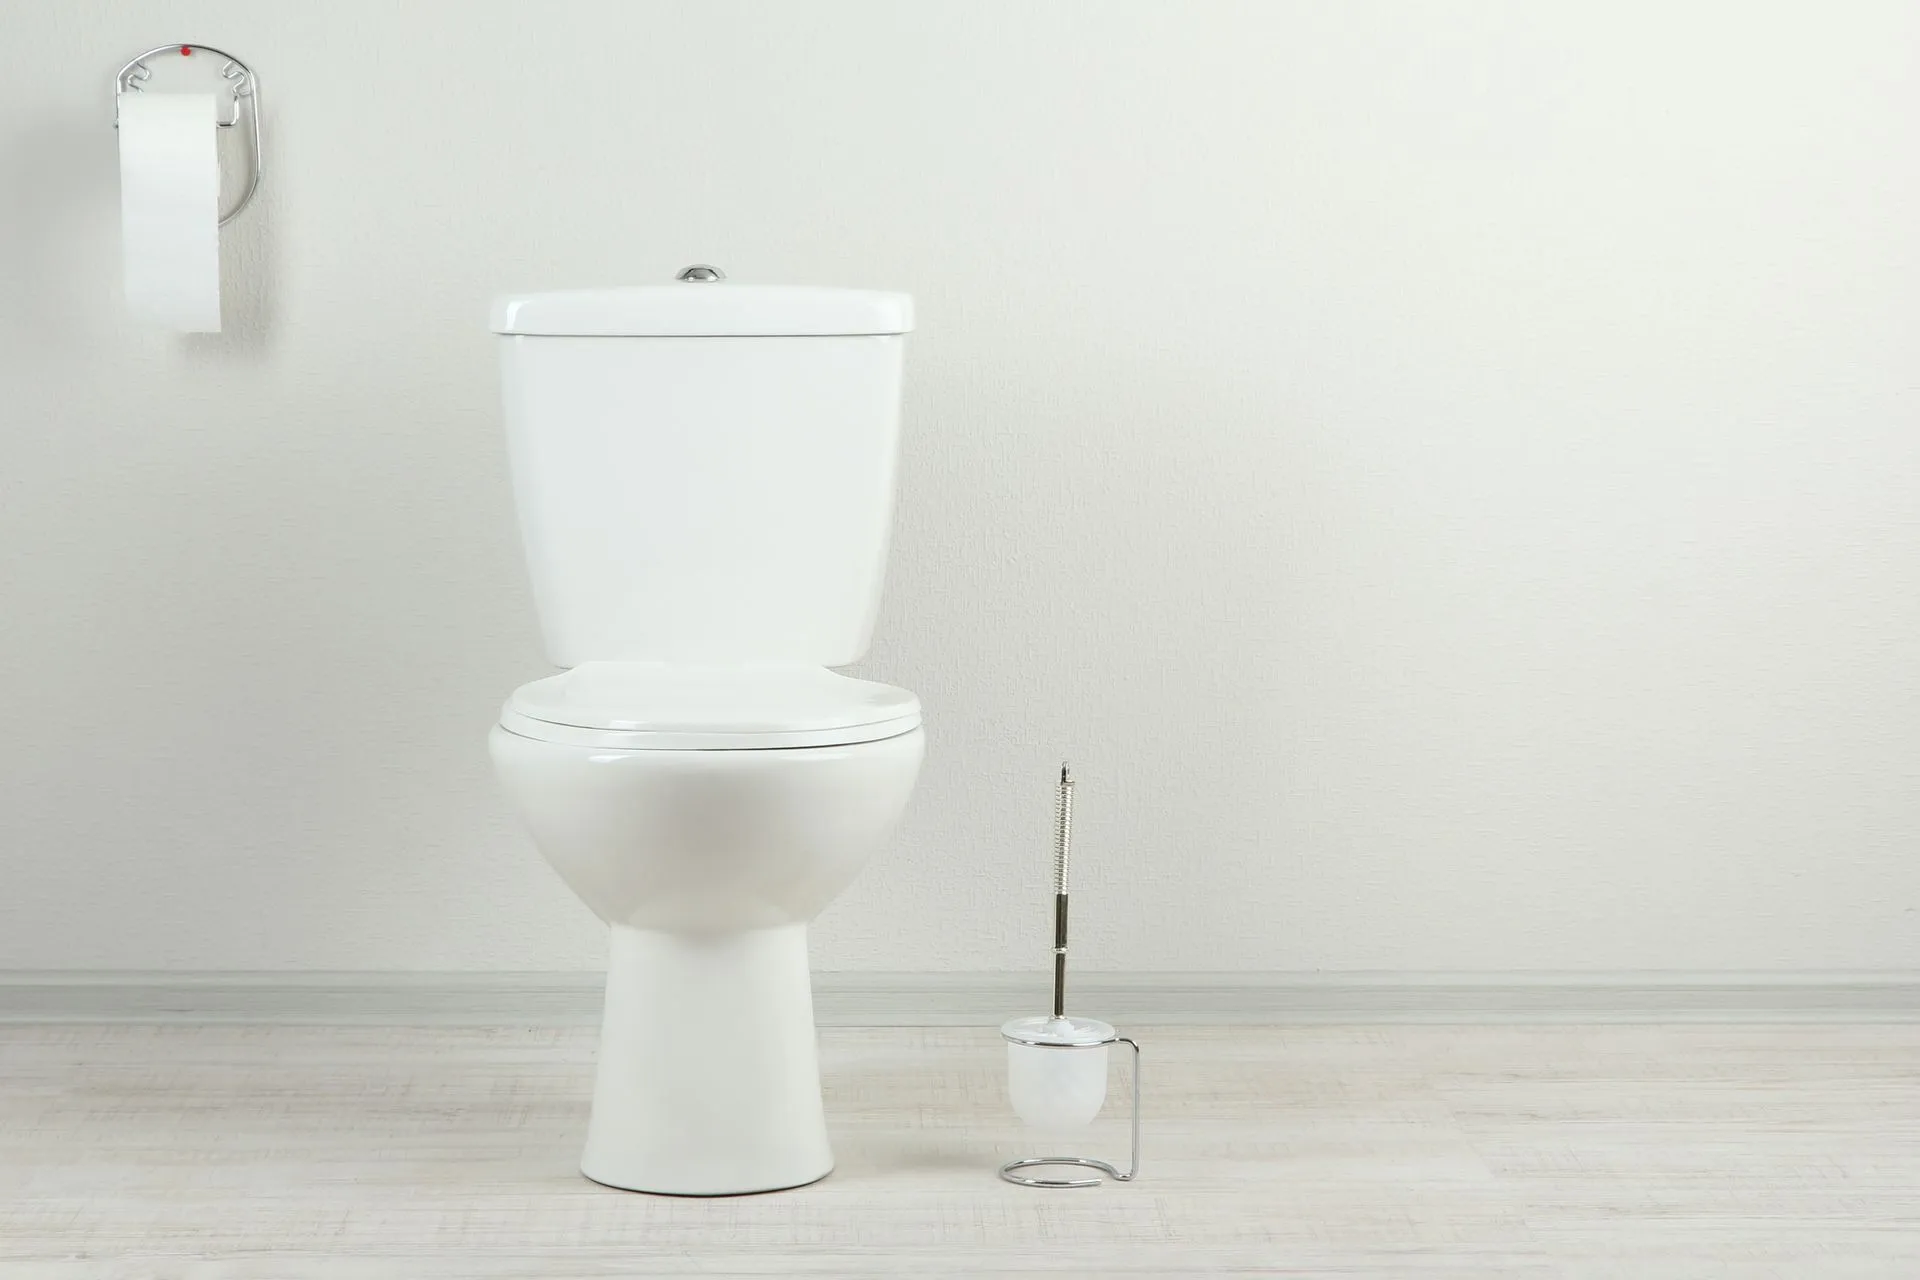 5 Common Toilet Issues and Complications